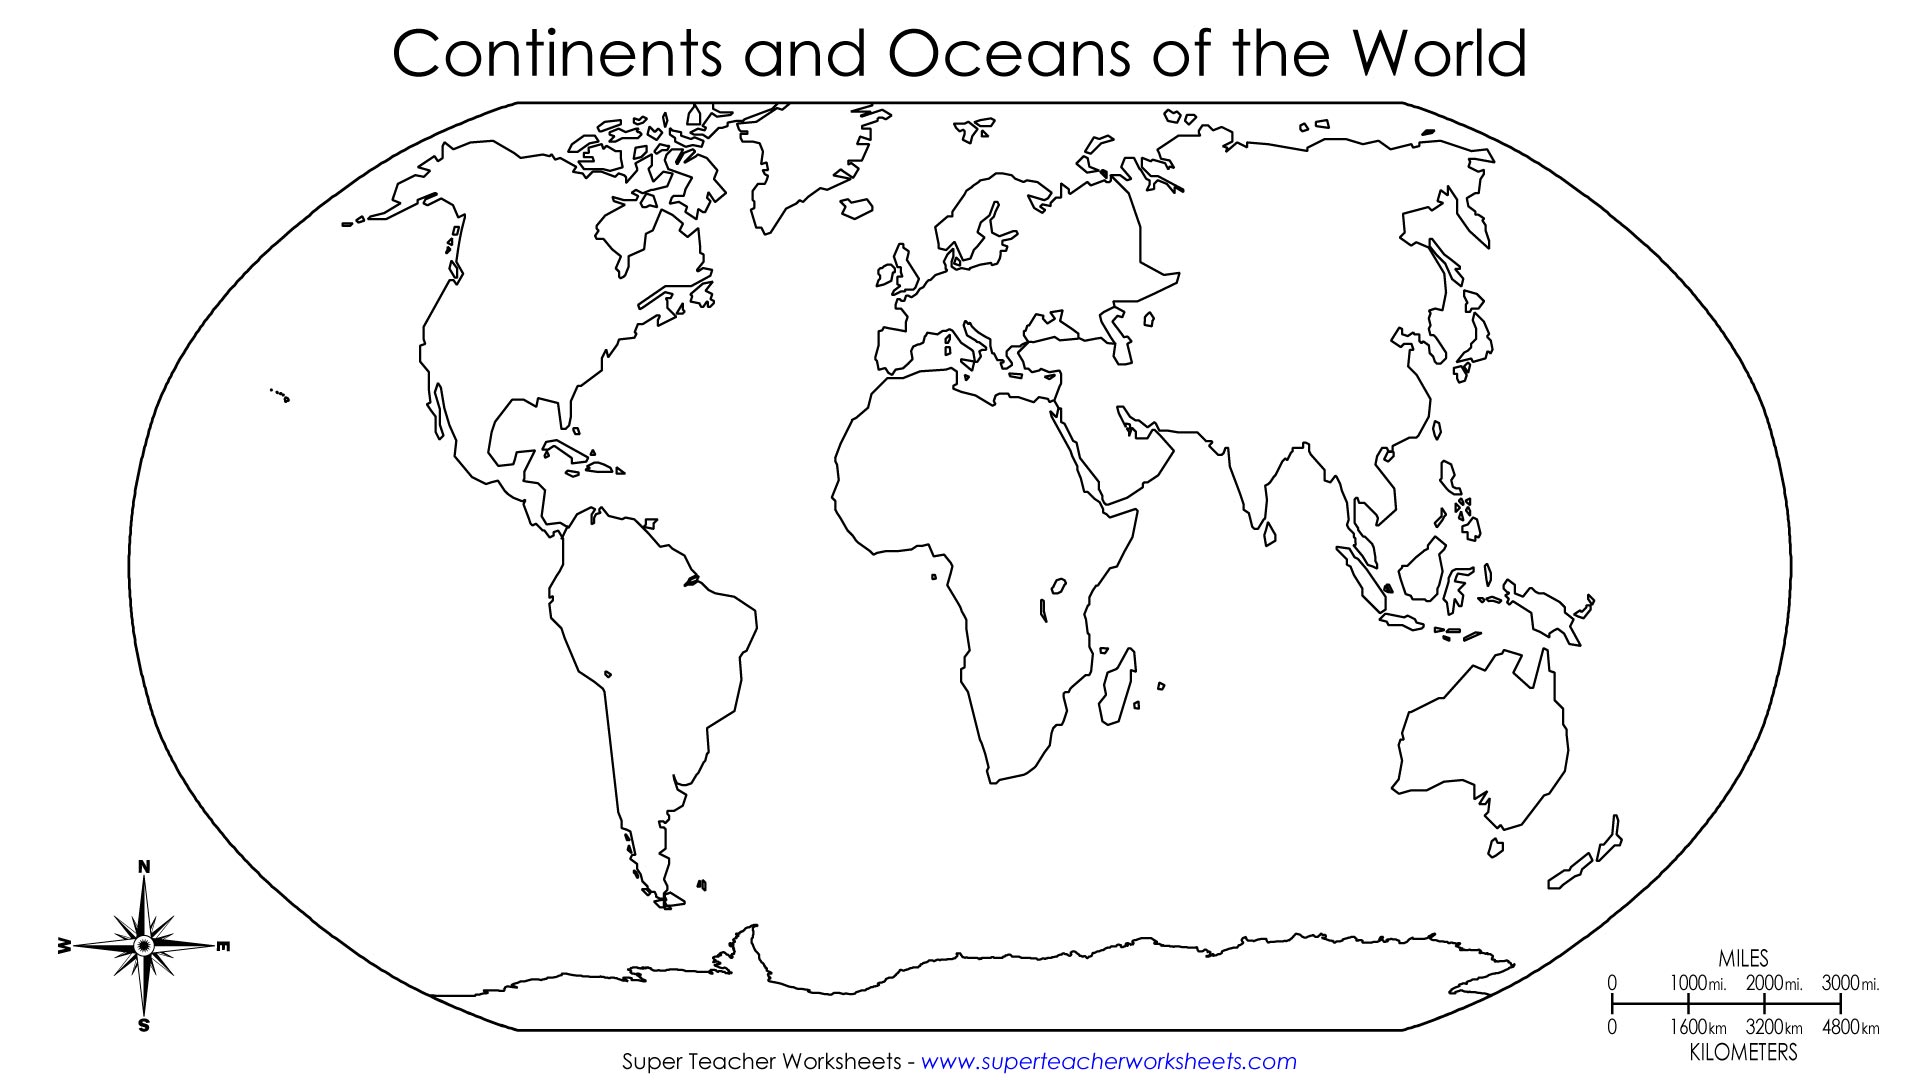 ... ocean febpage geography quiz oceans a short text a blank continents